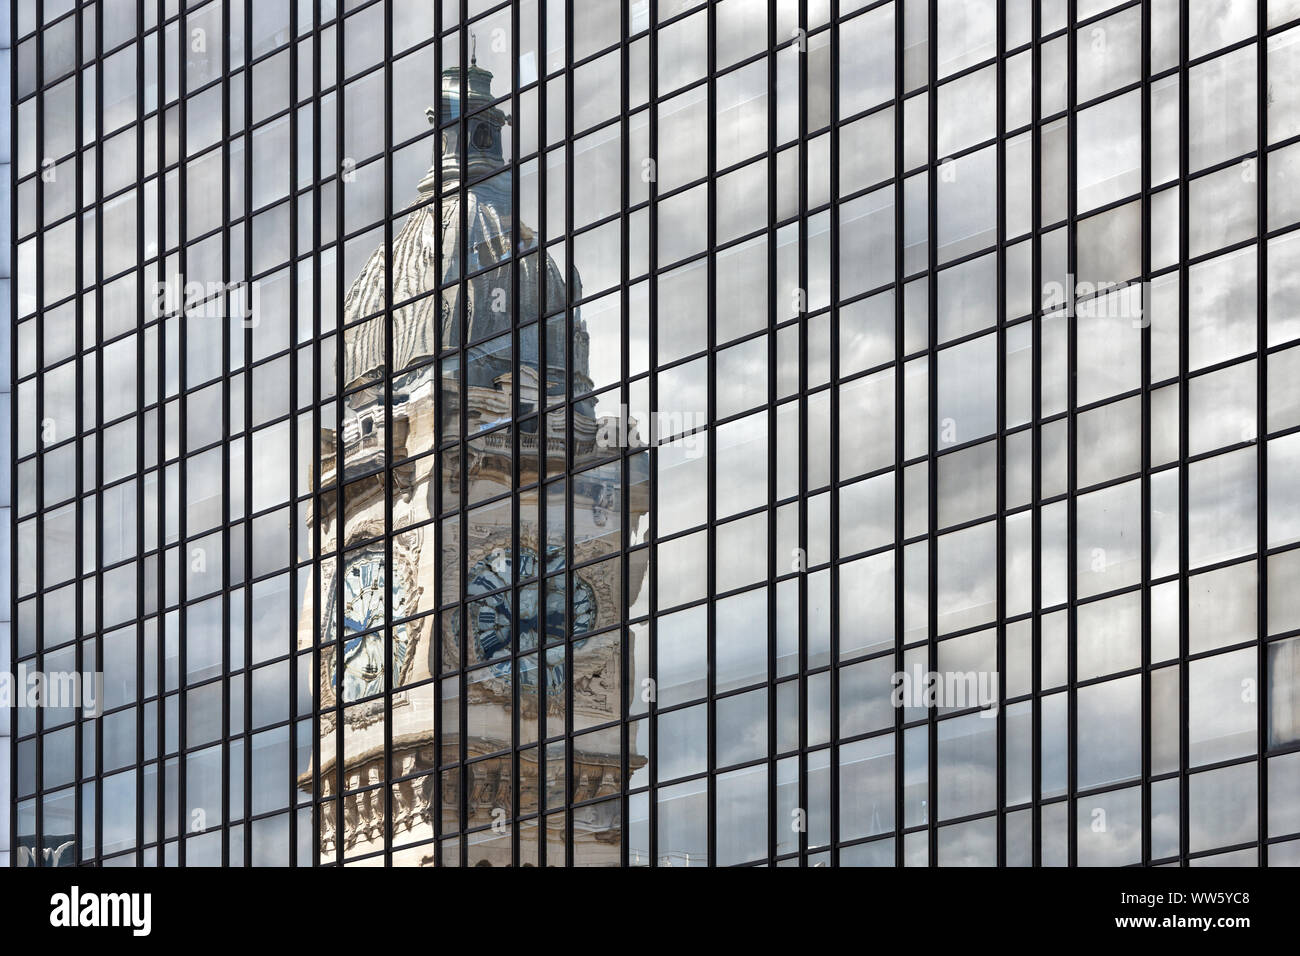 France, Paris, 9:39, clock tower, clock, from around 1900, reflection in glass front Stock Photo